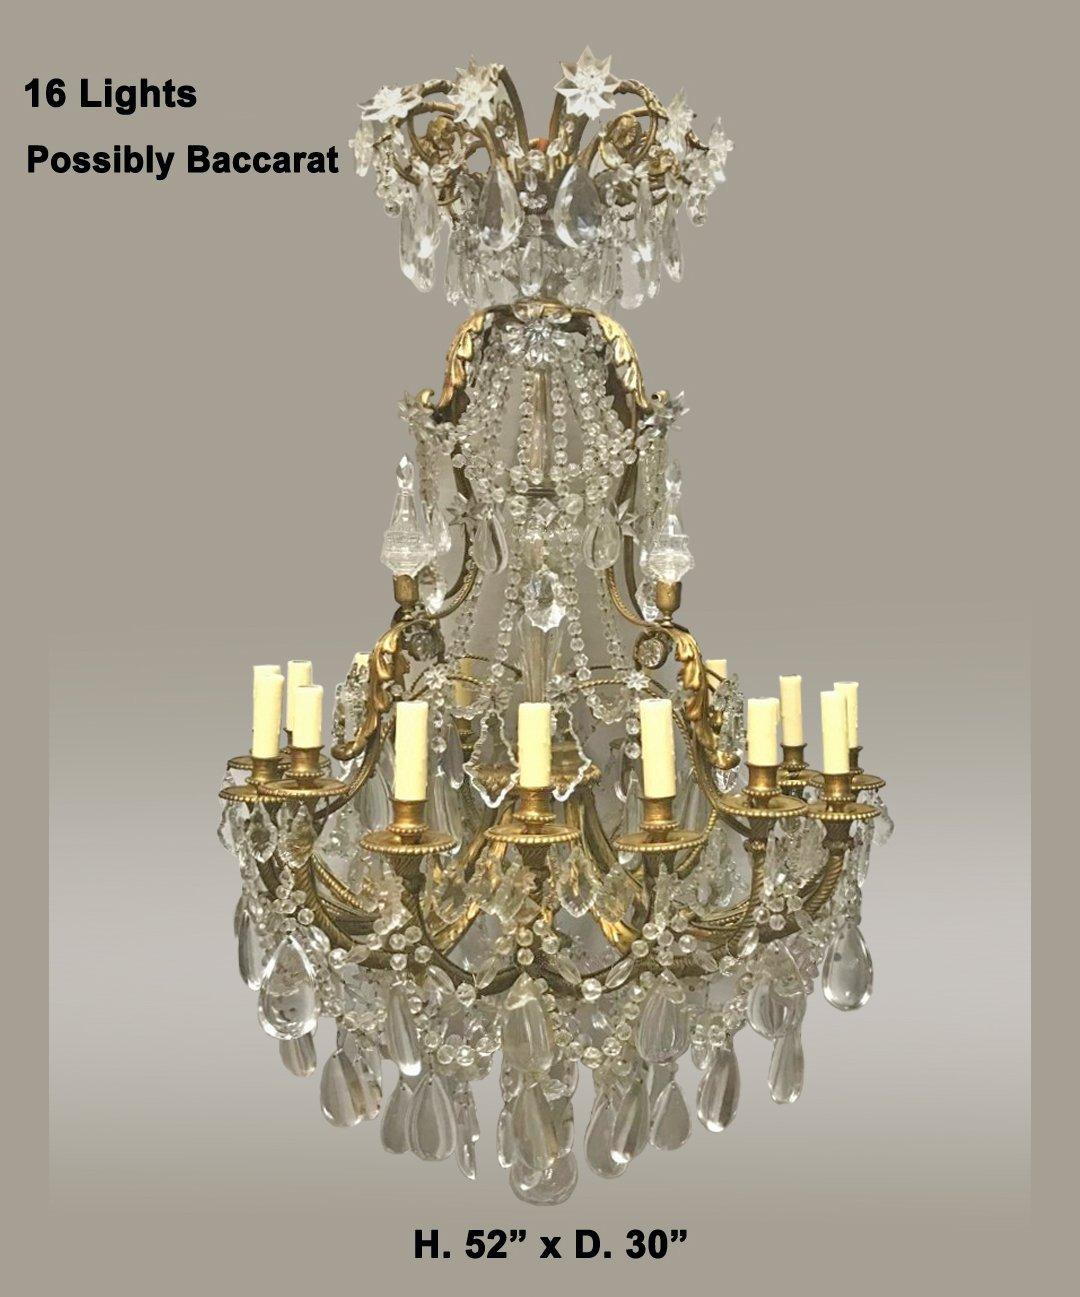 Exquisite French Louis XV style gilt bronze and crystal sixteen-light chandelier.
Late 19th century.
Possibly Baccarat (no signature apparent). 

The fine chandelier is surmounted by a gilt scrolling rosette-decorated crown dressed with various